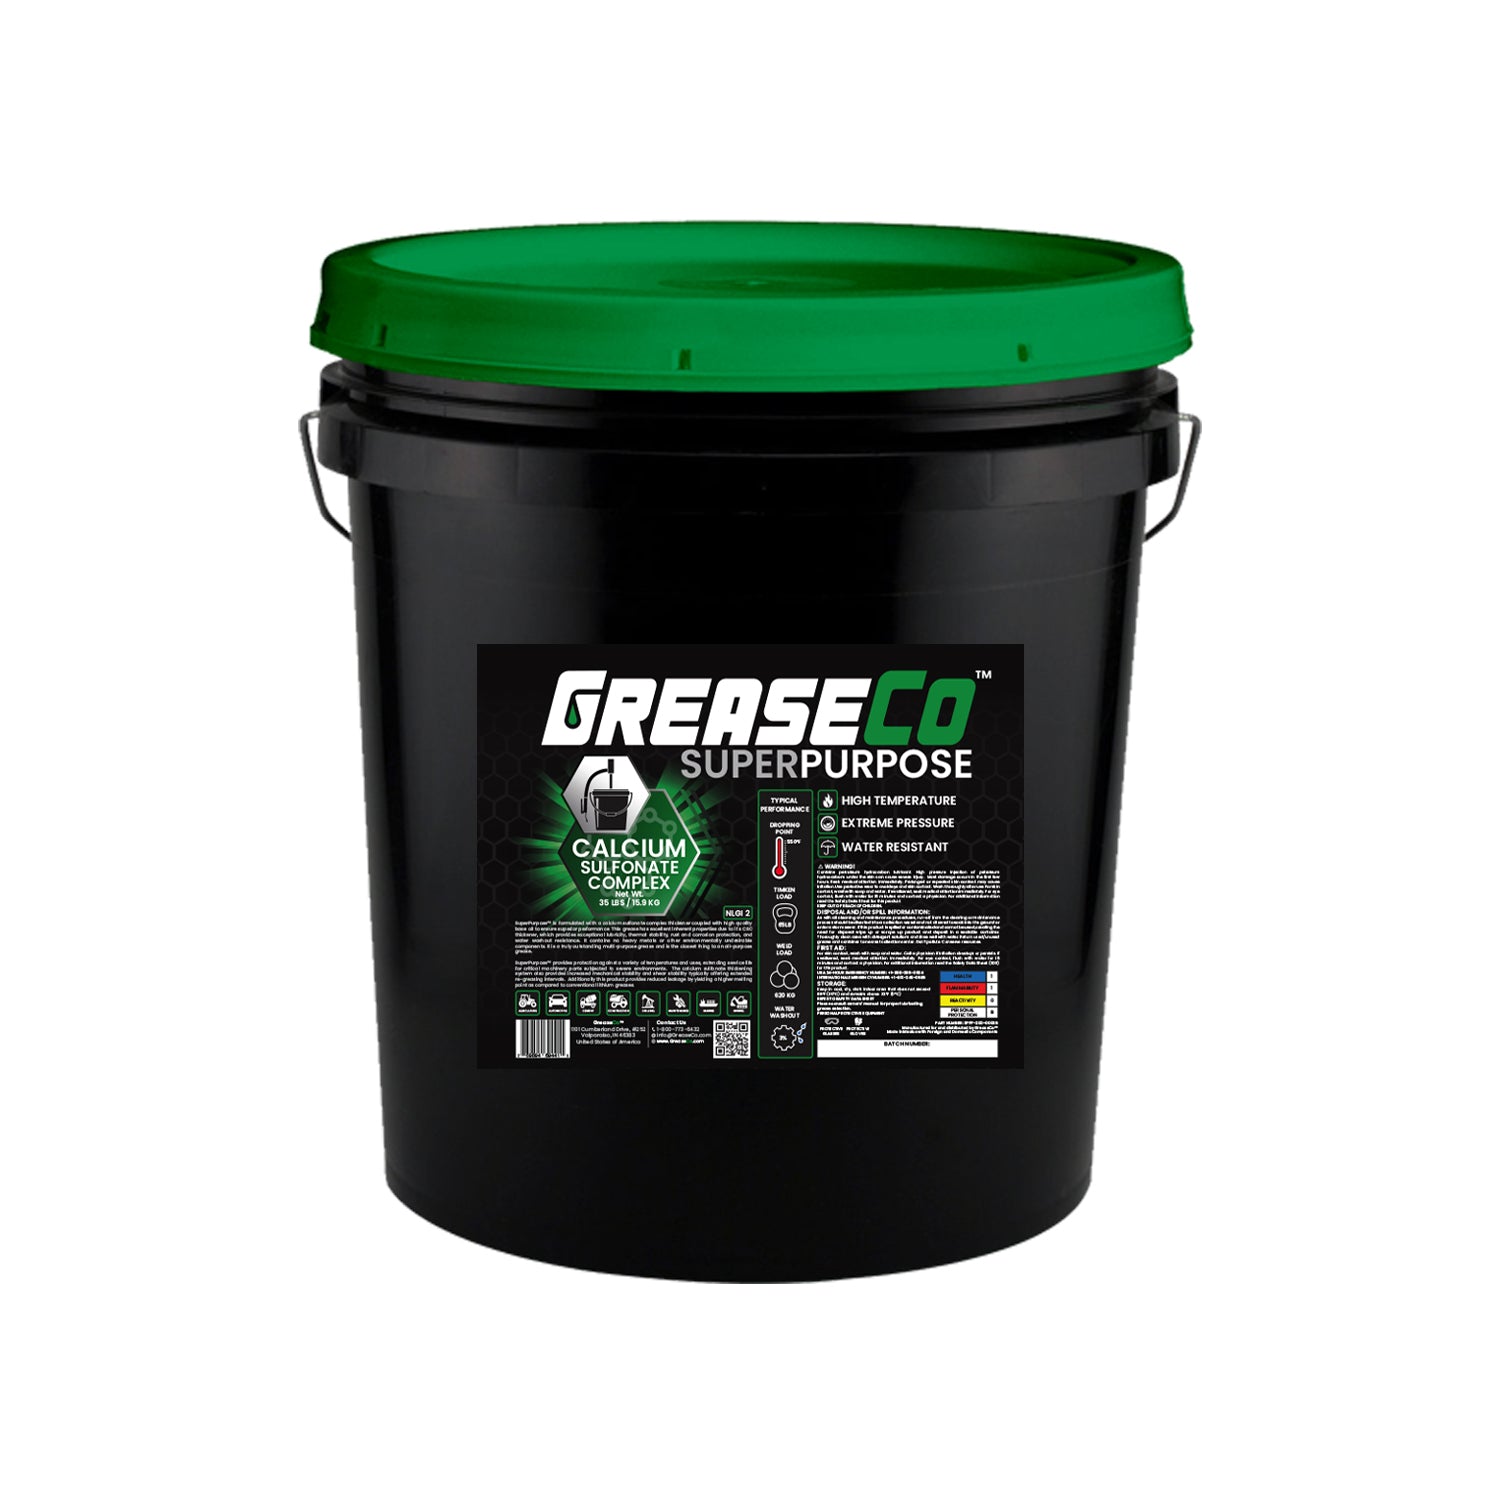 Calcium Sulfonate High Temp High Performance Grease 35 LB Pail of GreaseCo SuperPurpose